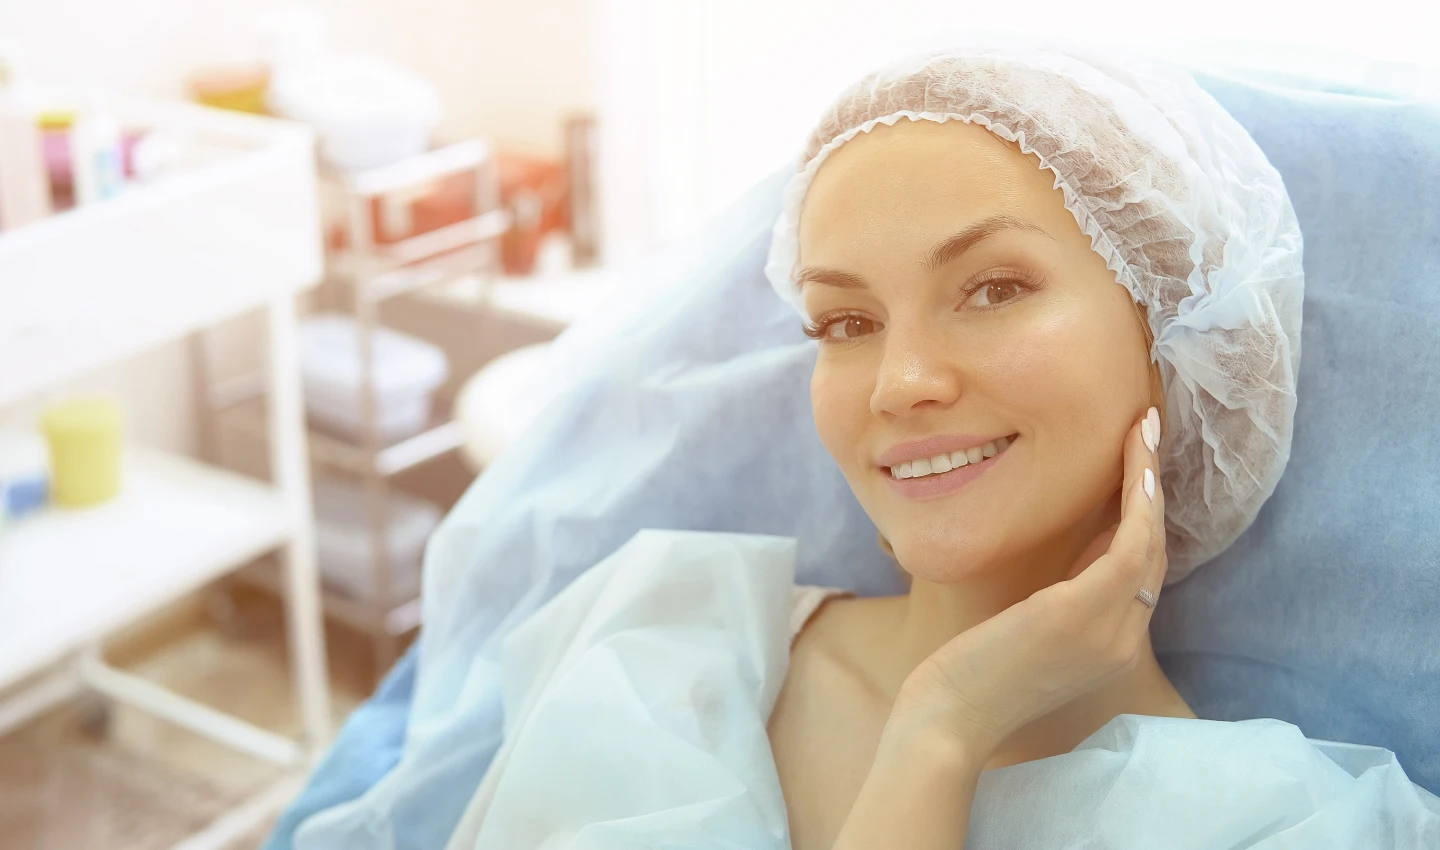 A woman in a hospital gown prepares for hairline restoration surgery by following the essential pre-operative steps of hairline restoration preparation.